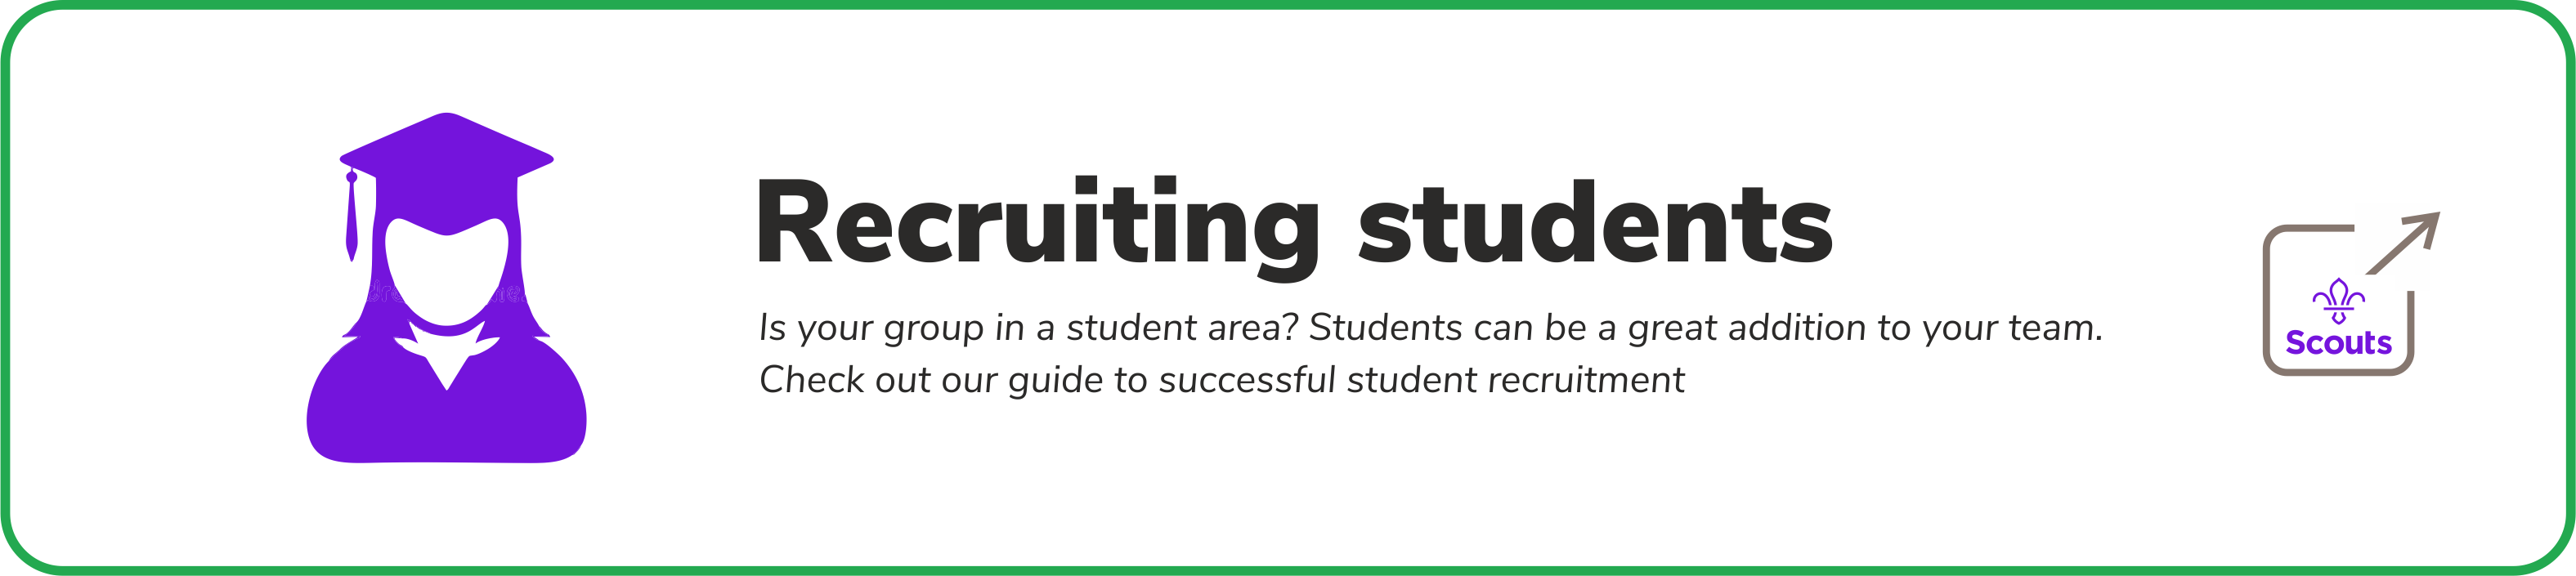 Recruiting students